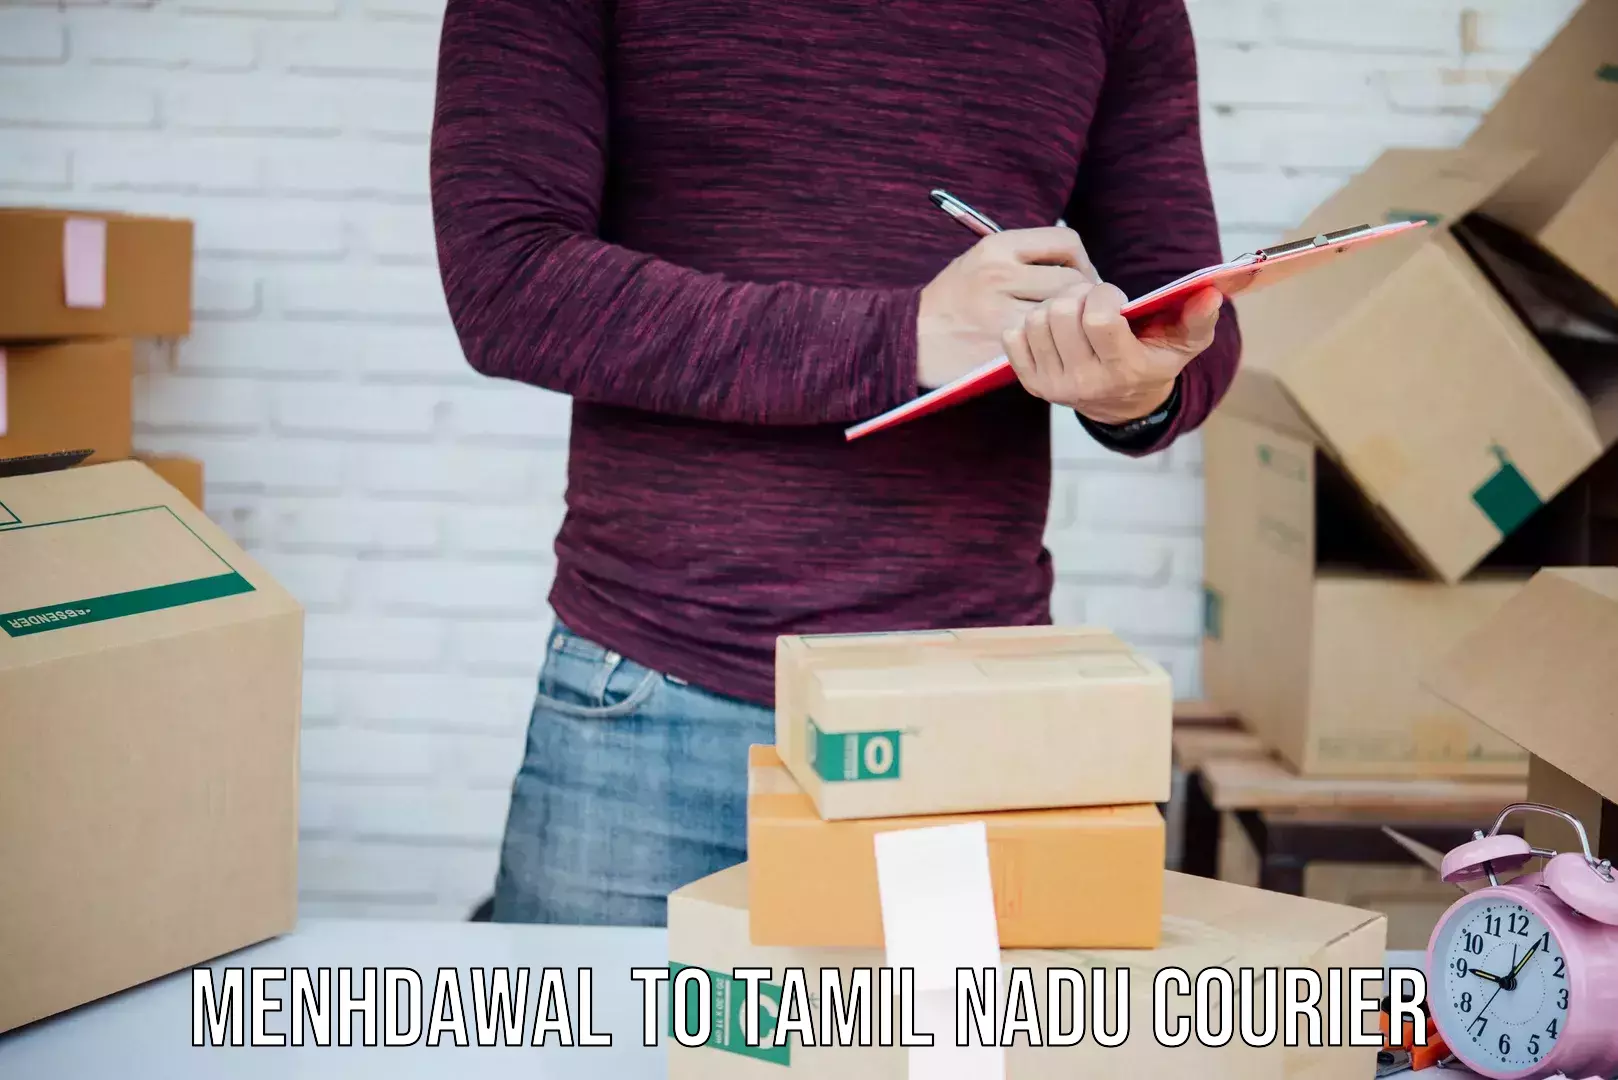 Multi-service courier options Menhdawal to Coimbatore